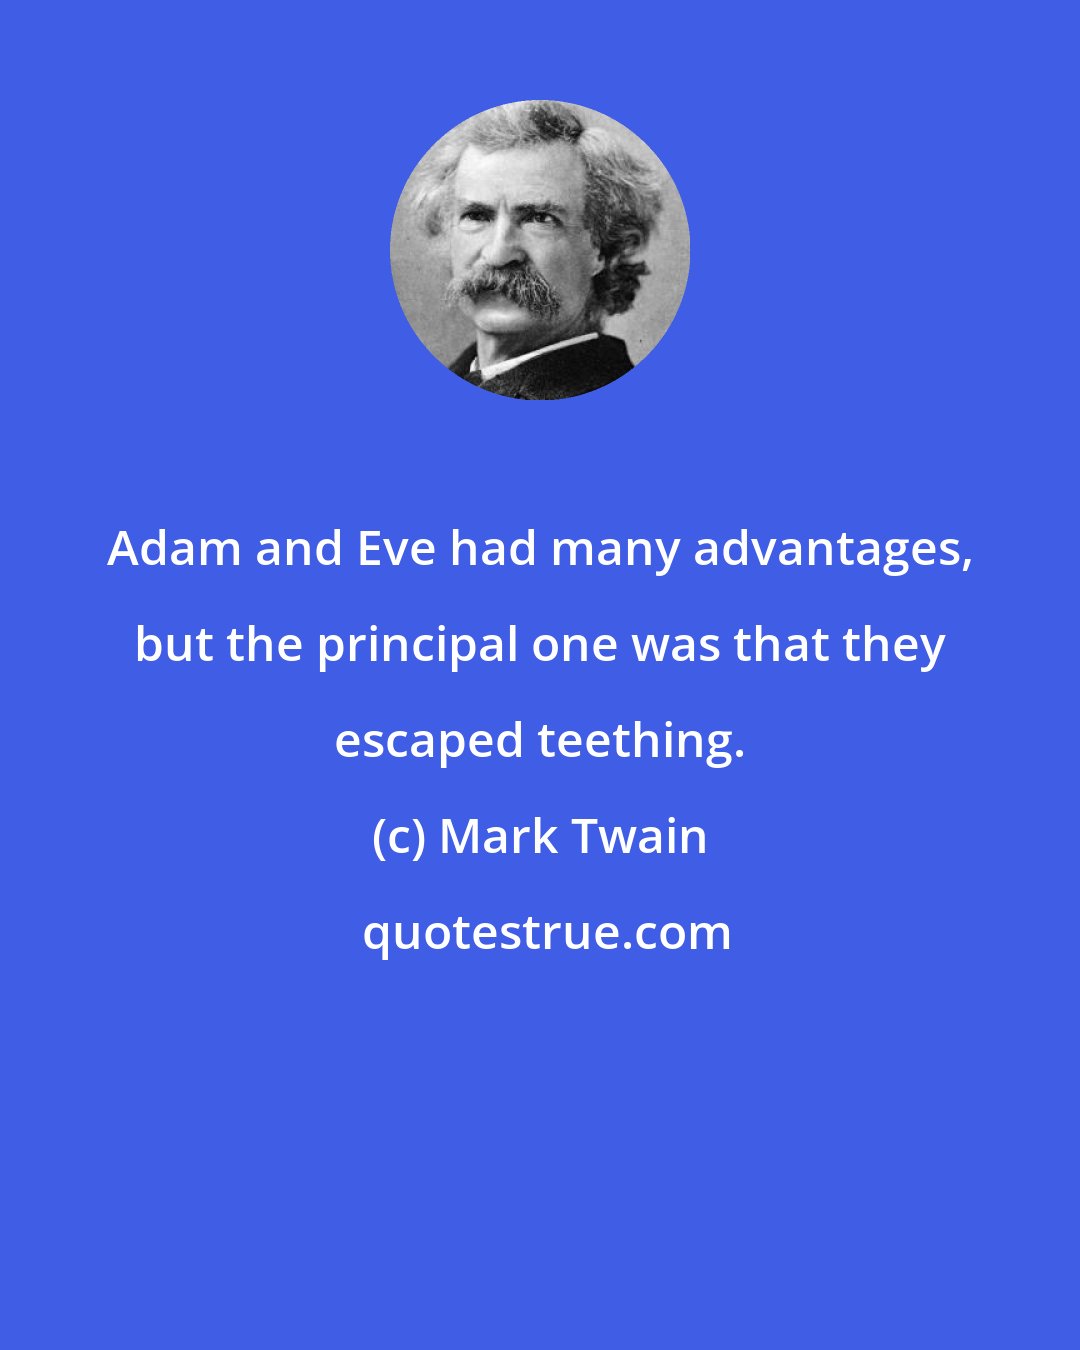 Mark Twain: Adam and Eve had many advantages, but the principal one was that they escaped teething.